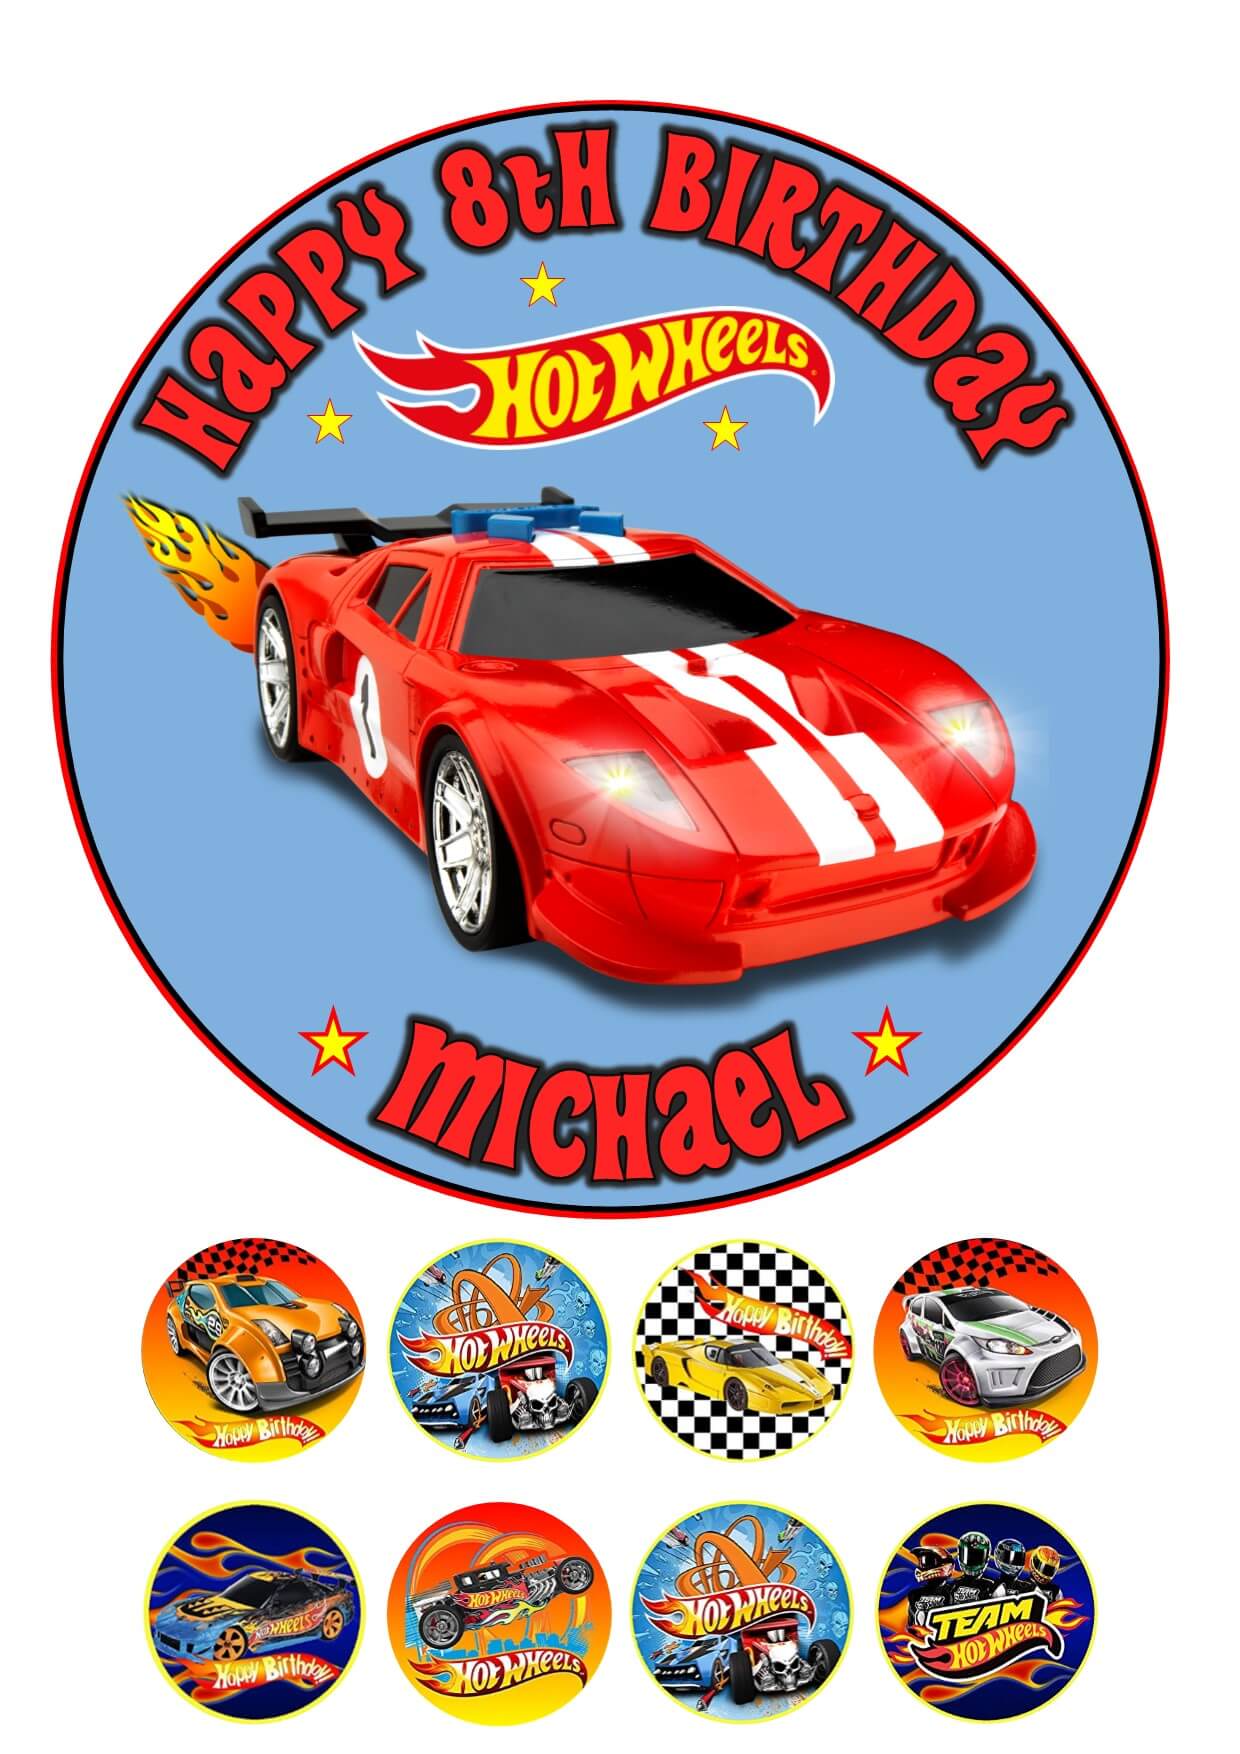 Hotwheels Theme Personalised Birthday Cake Topper Unofficial - Etsy